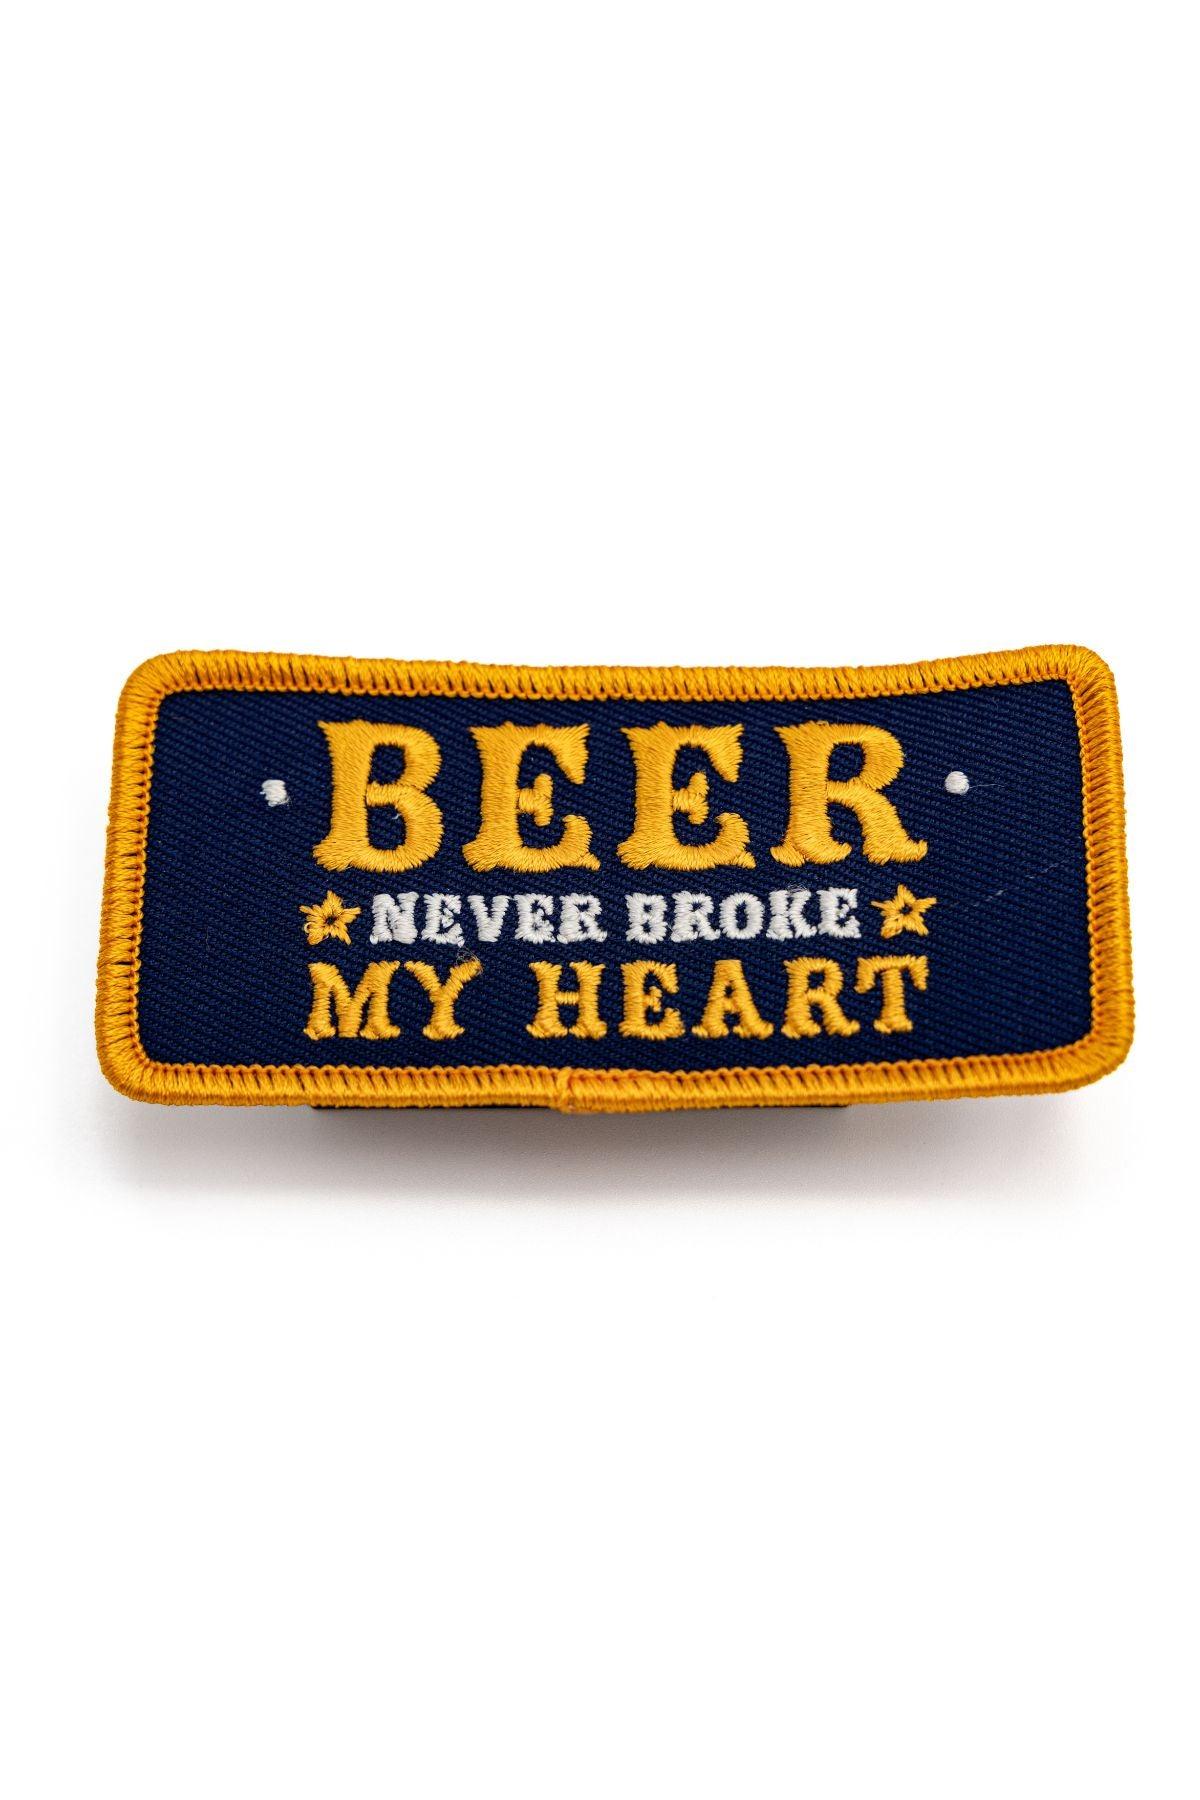 BEER NEVER BROKE MY HEART EMBROIDERED PATCH - Cowboy Snapback